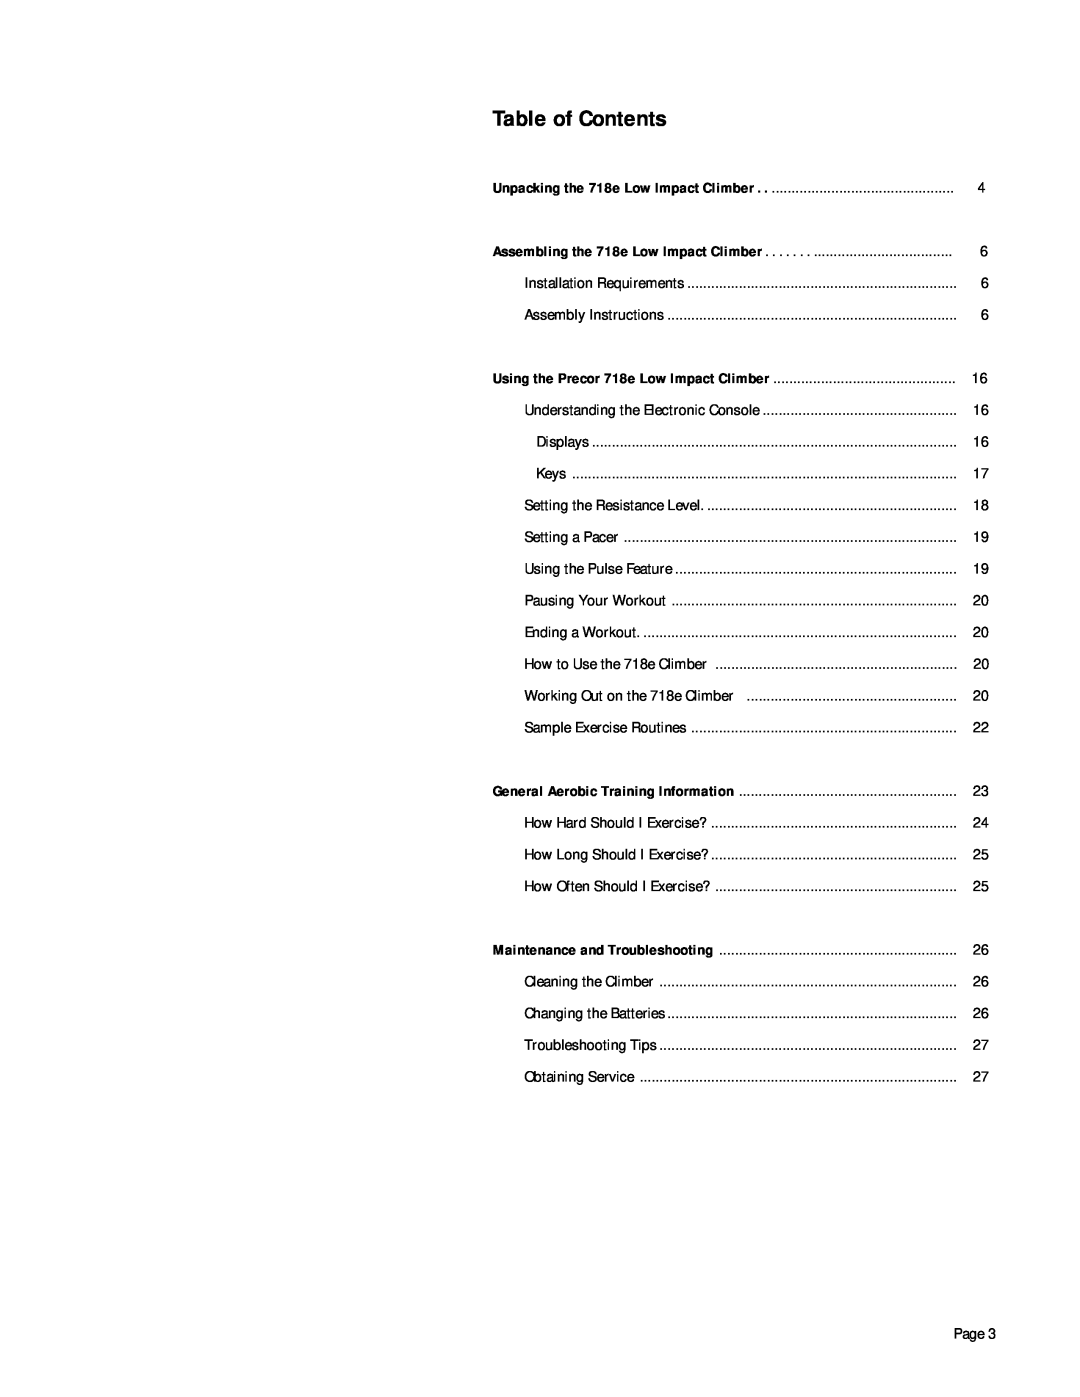 Precor 718e owner manual Table of Contents, Understanding the Electronic Console 